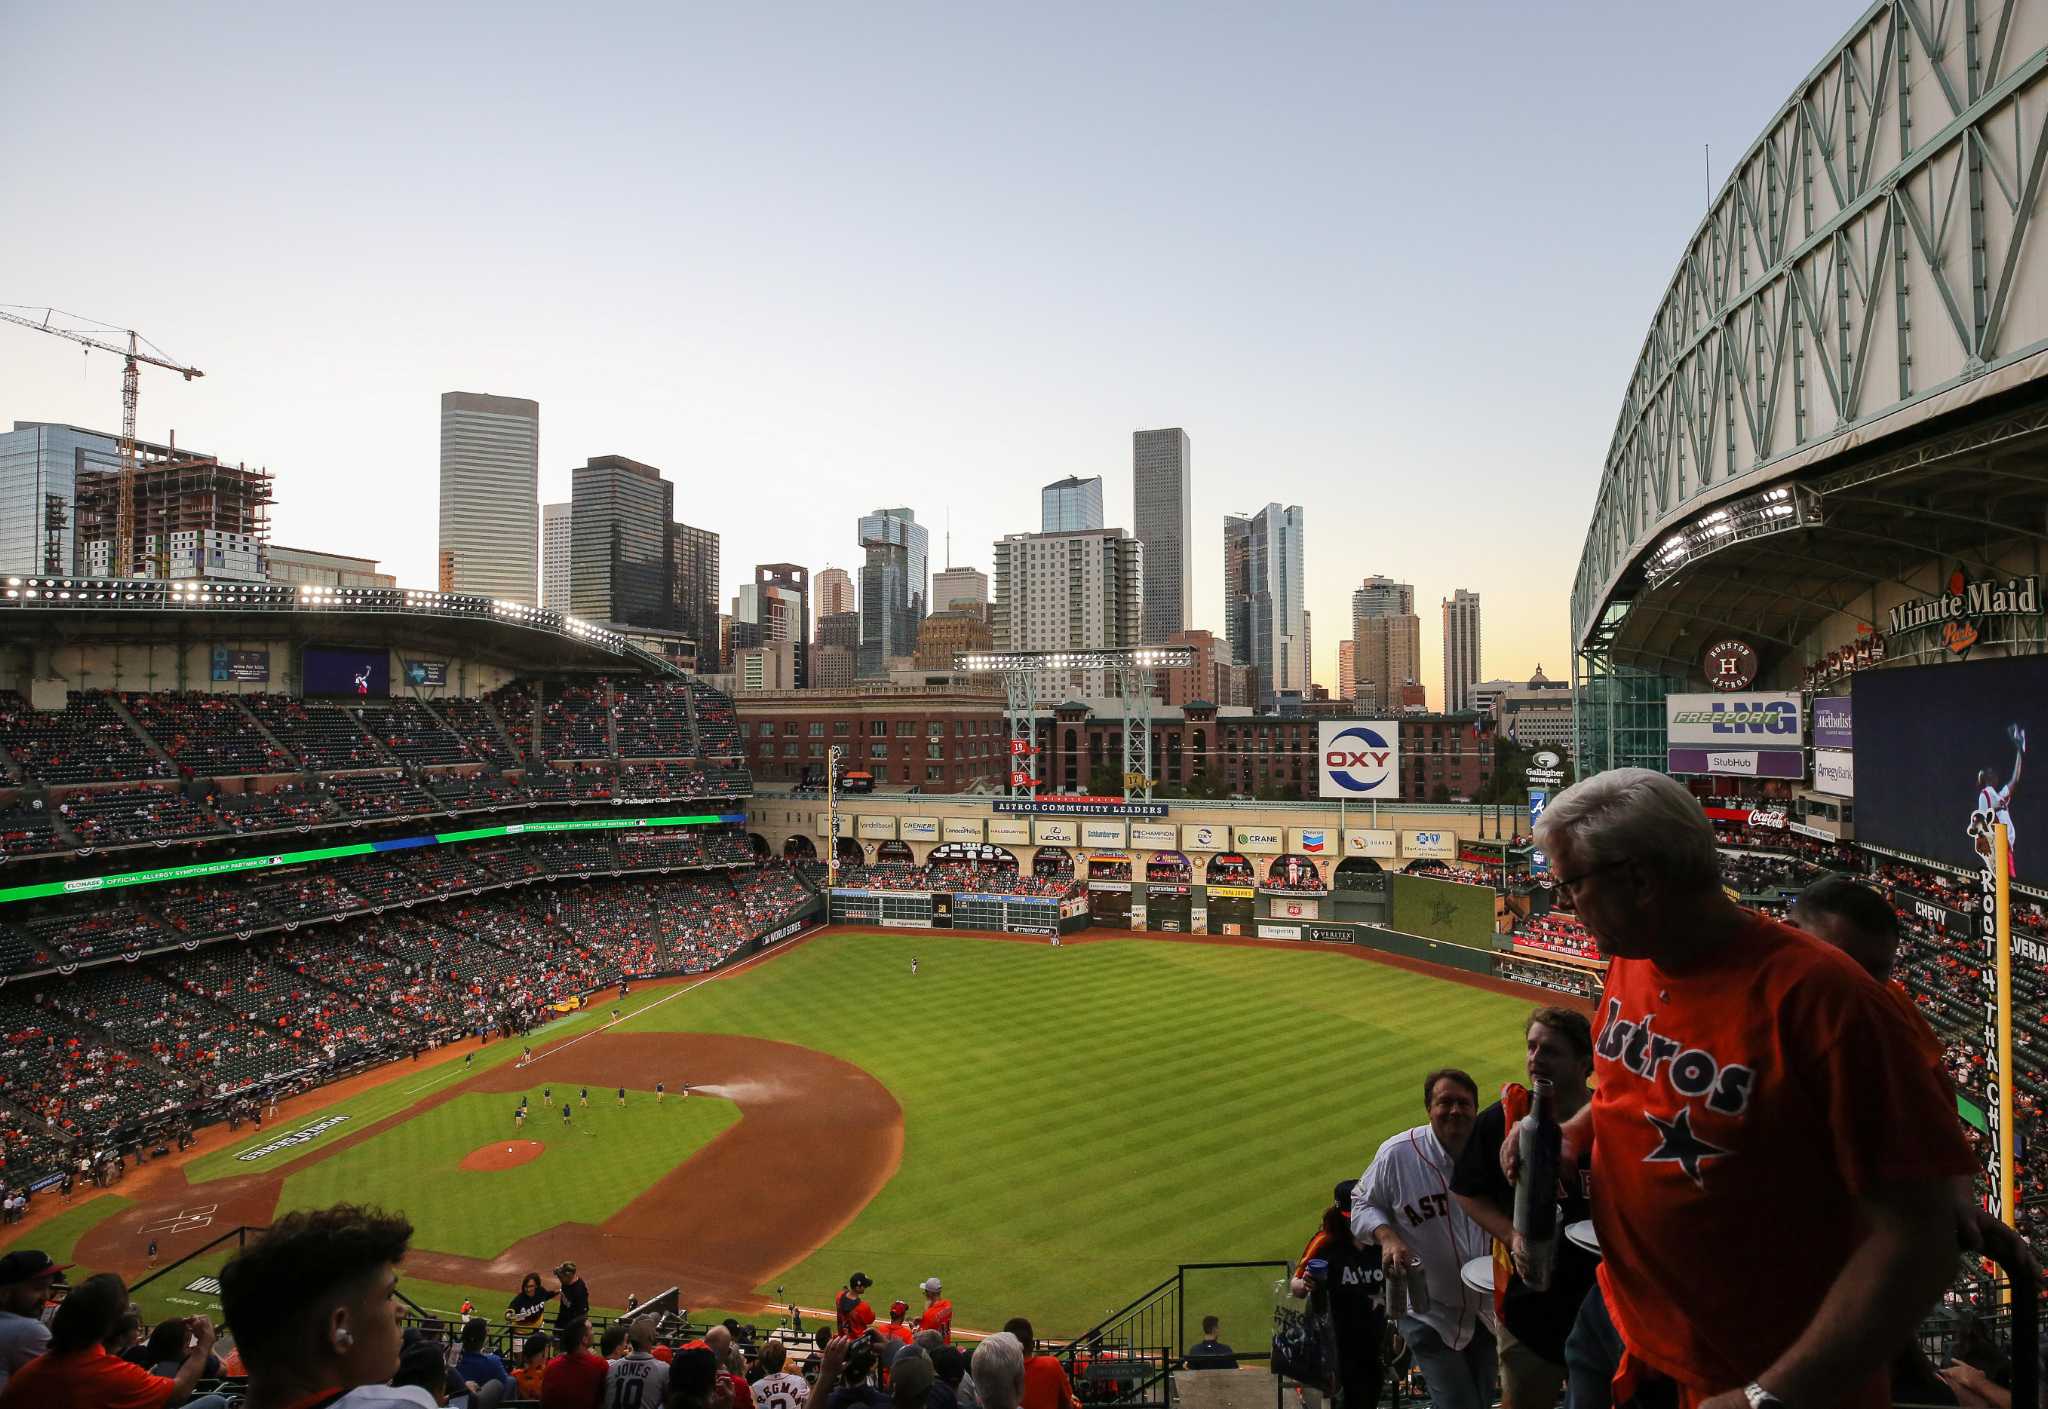 Aggregate 63+ minute maid park bag policy latest esthdonghoadian